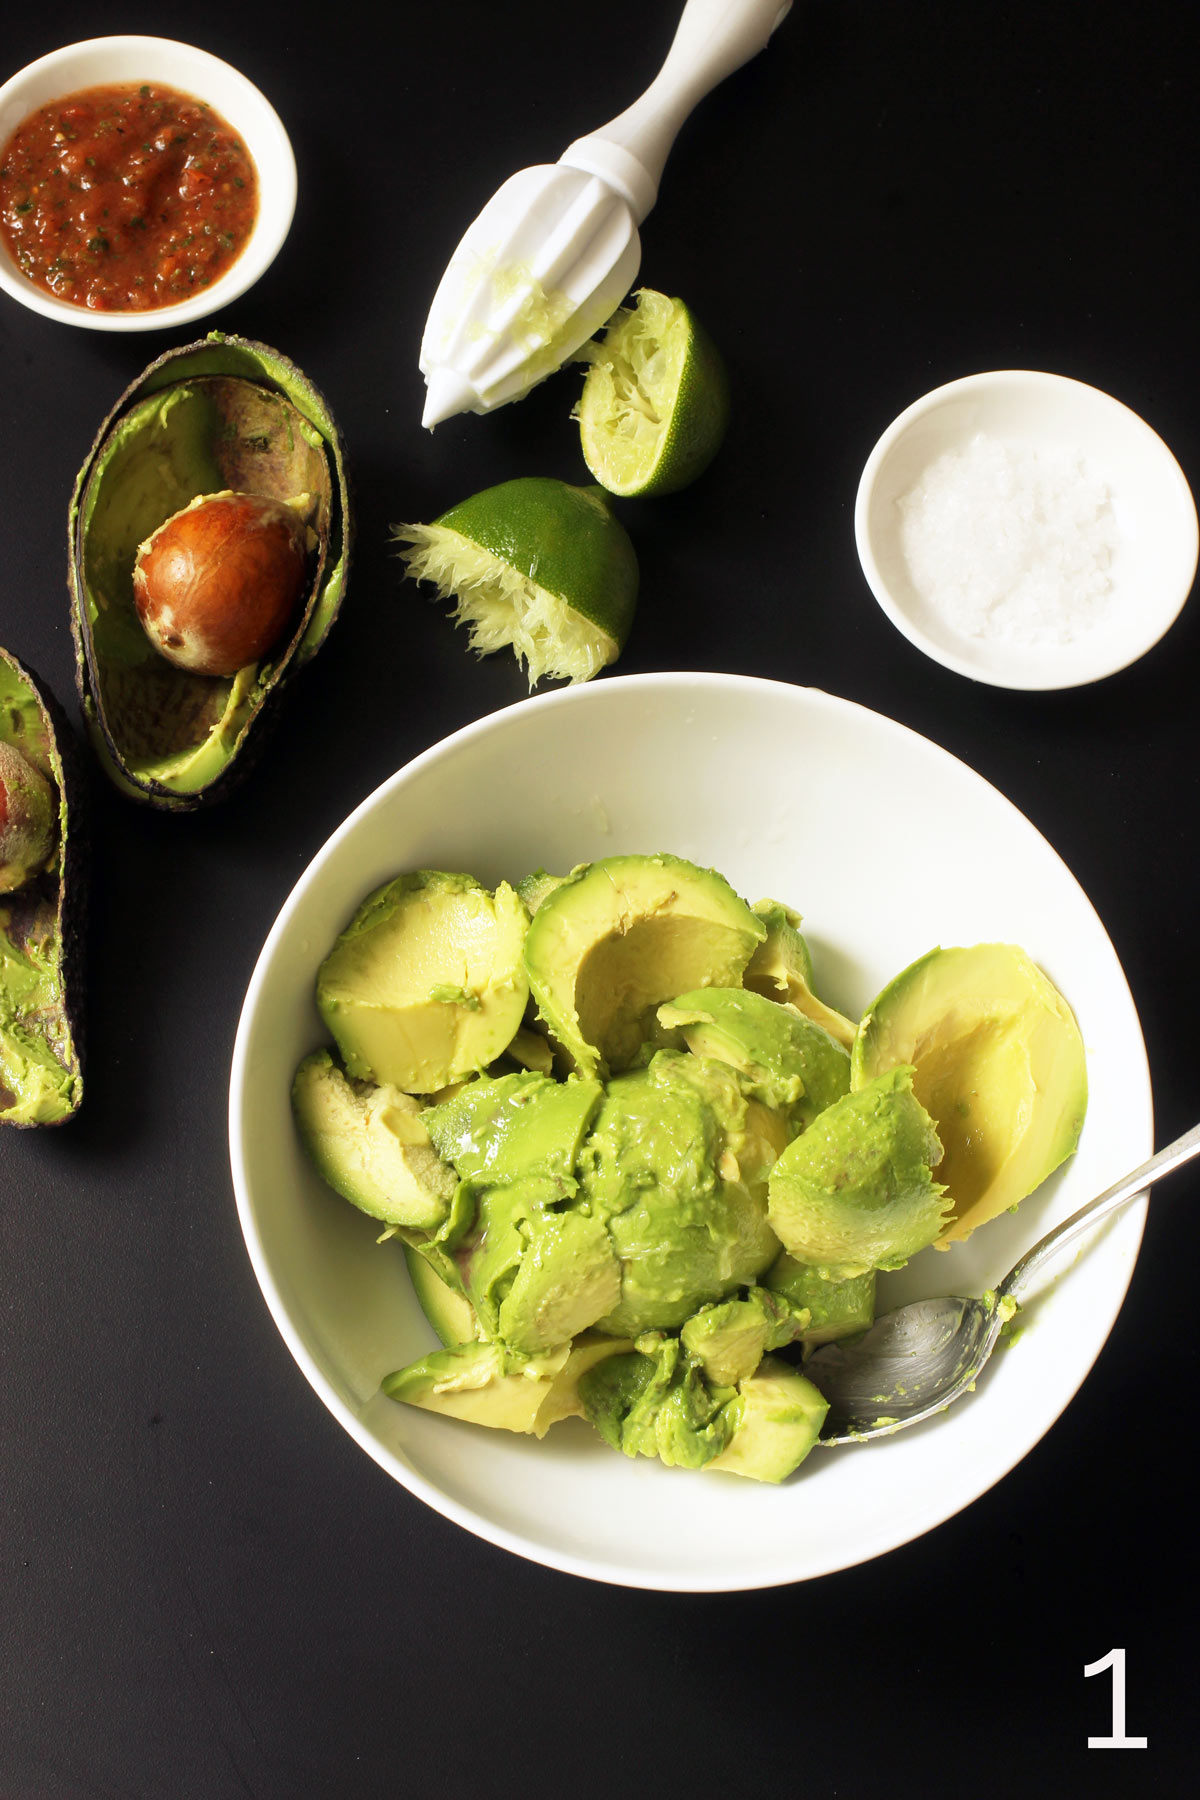 avocado scooped into bowl and lime juiced over the avocado chunks